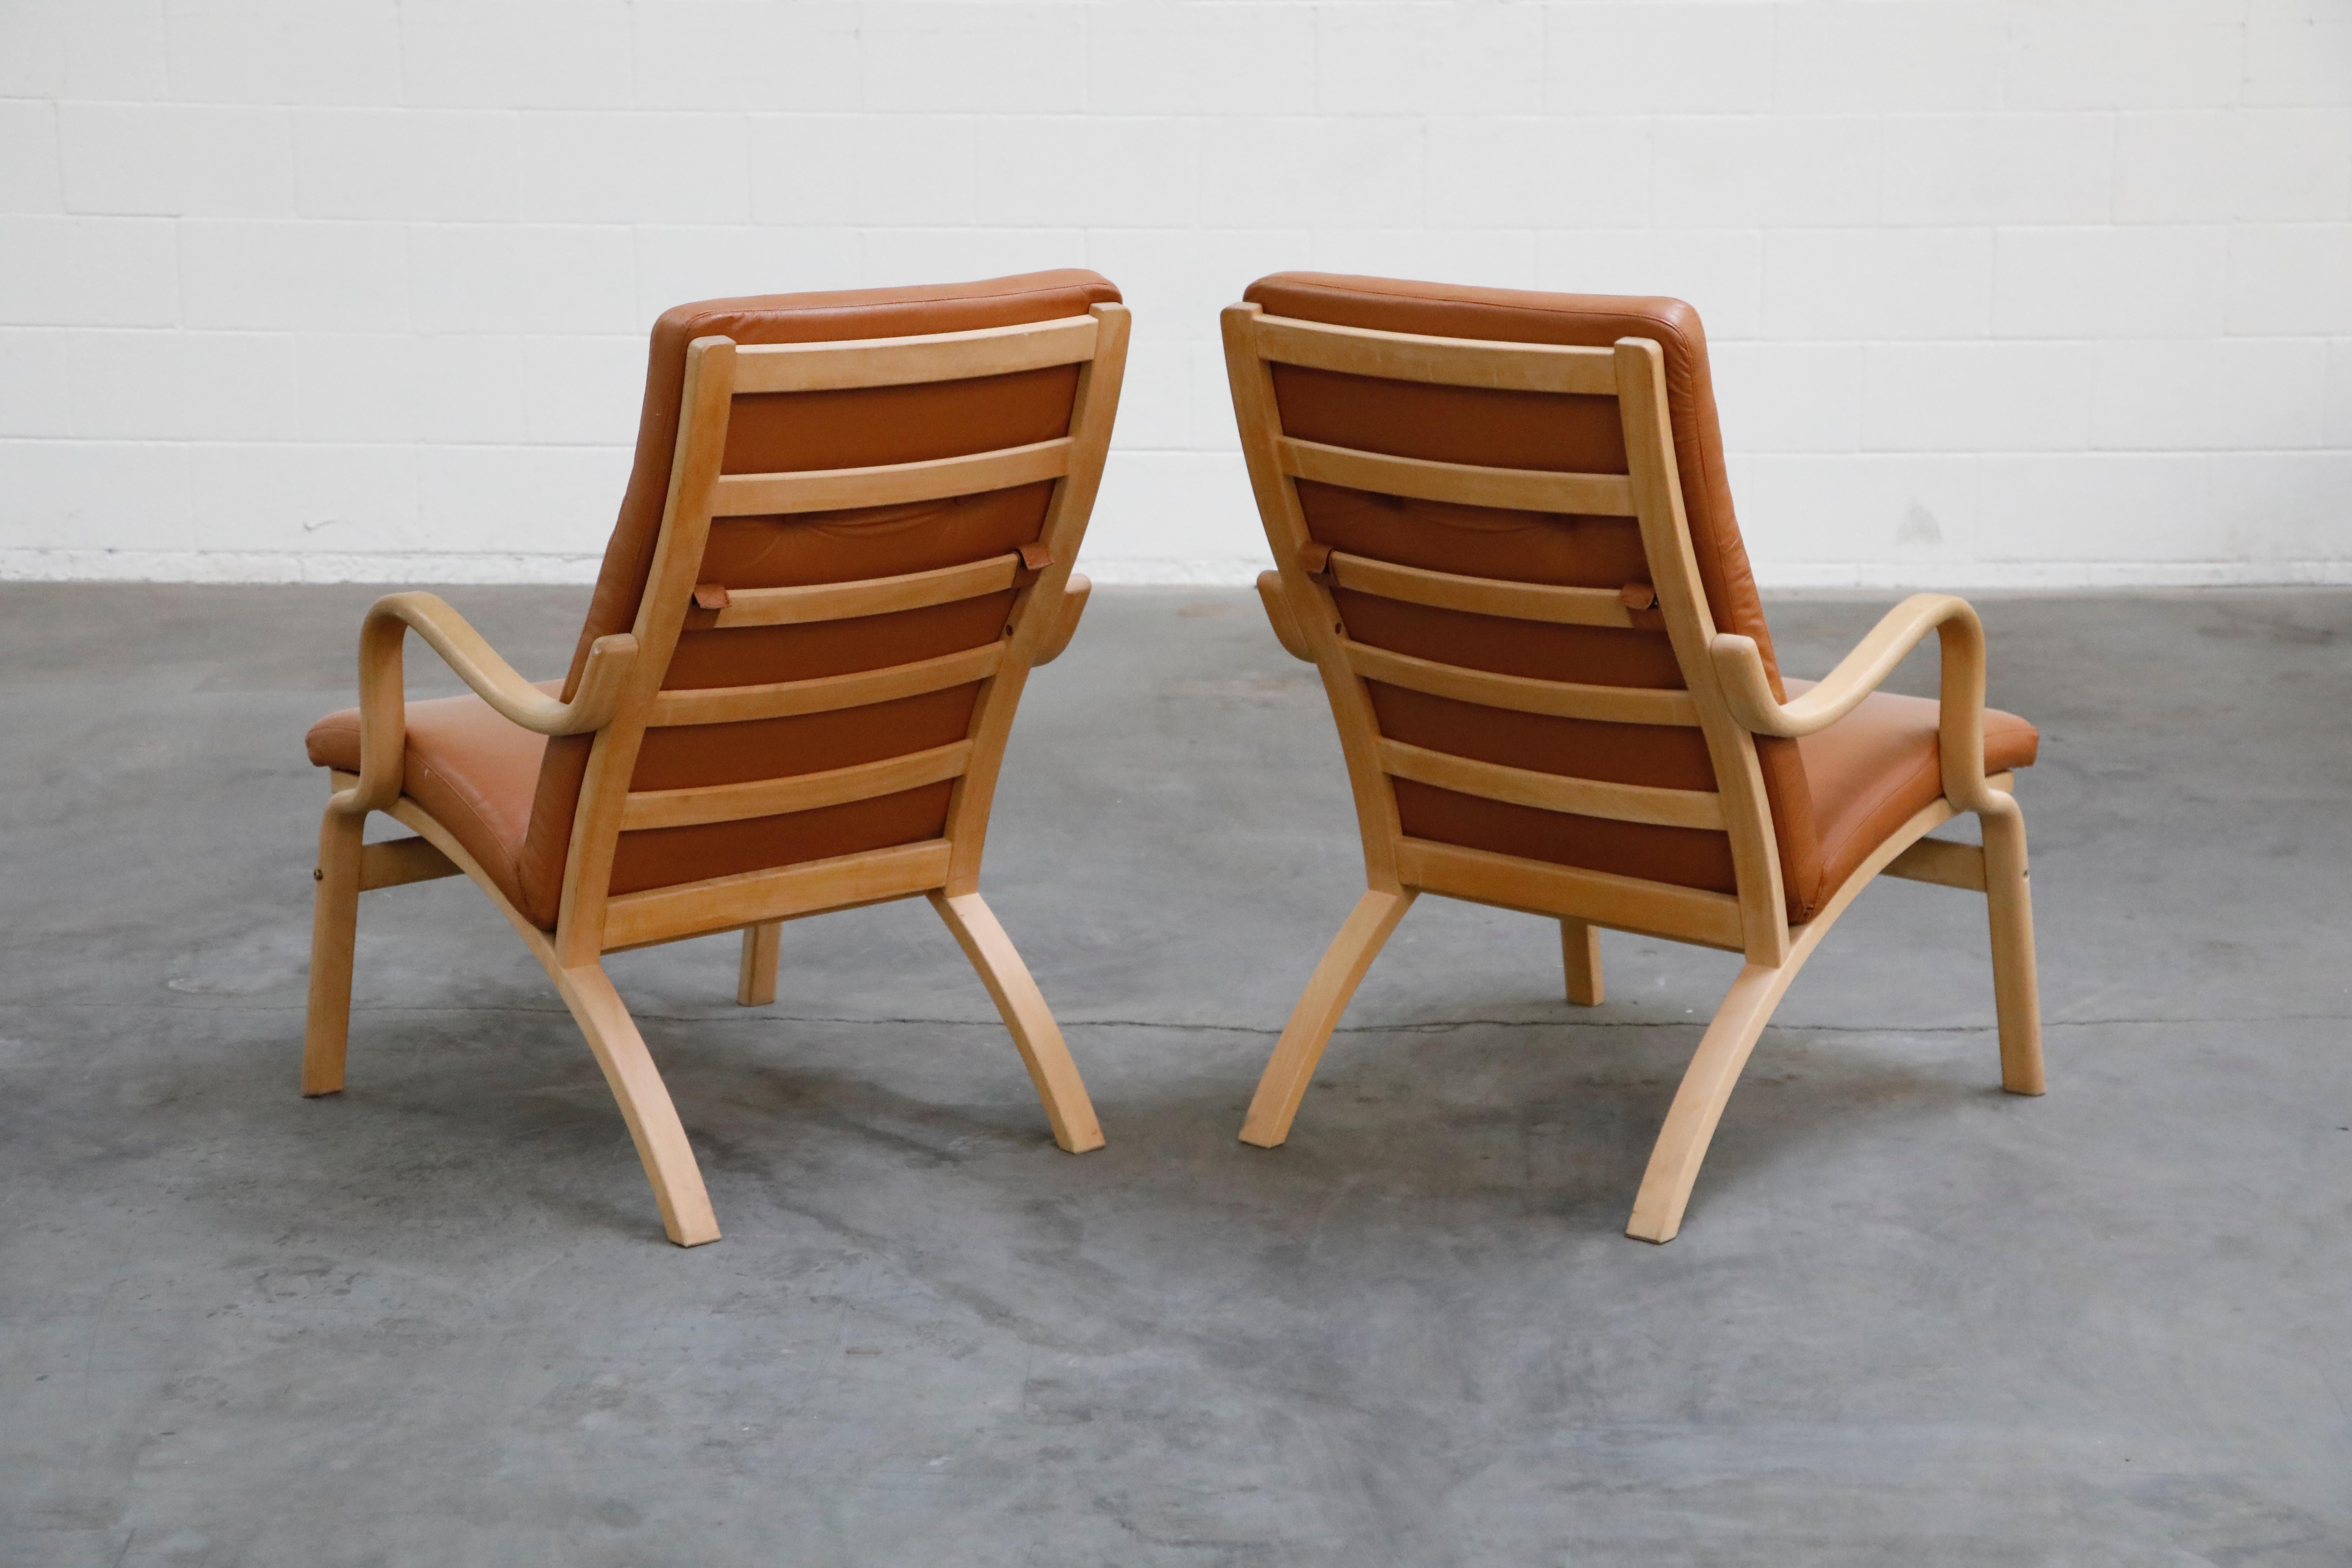 Late 20th Century Scandinavian Bentwood Leather Lounge Chairs and Ottoman, circa 1970s